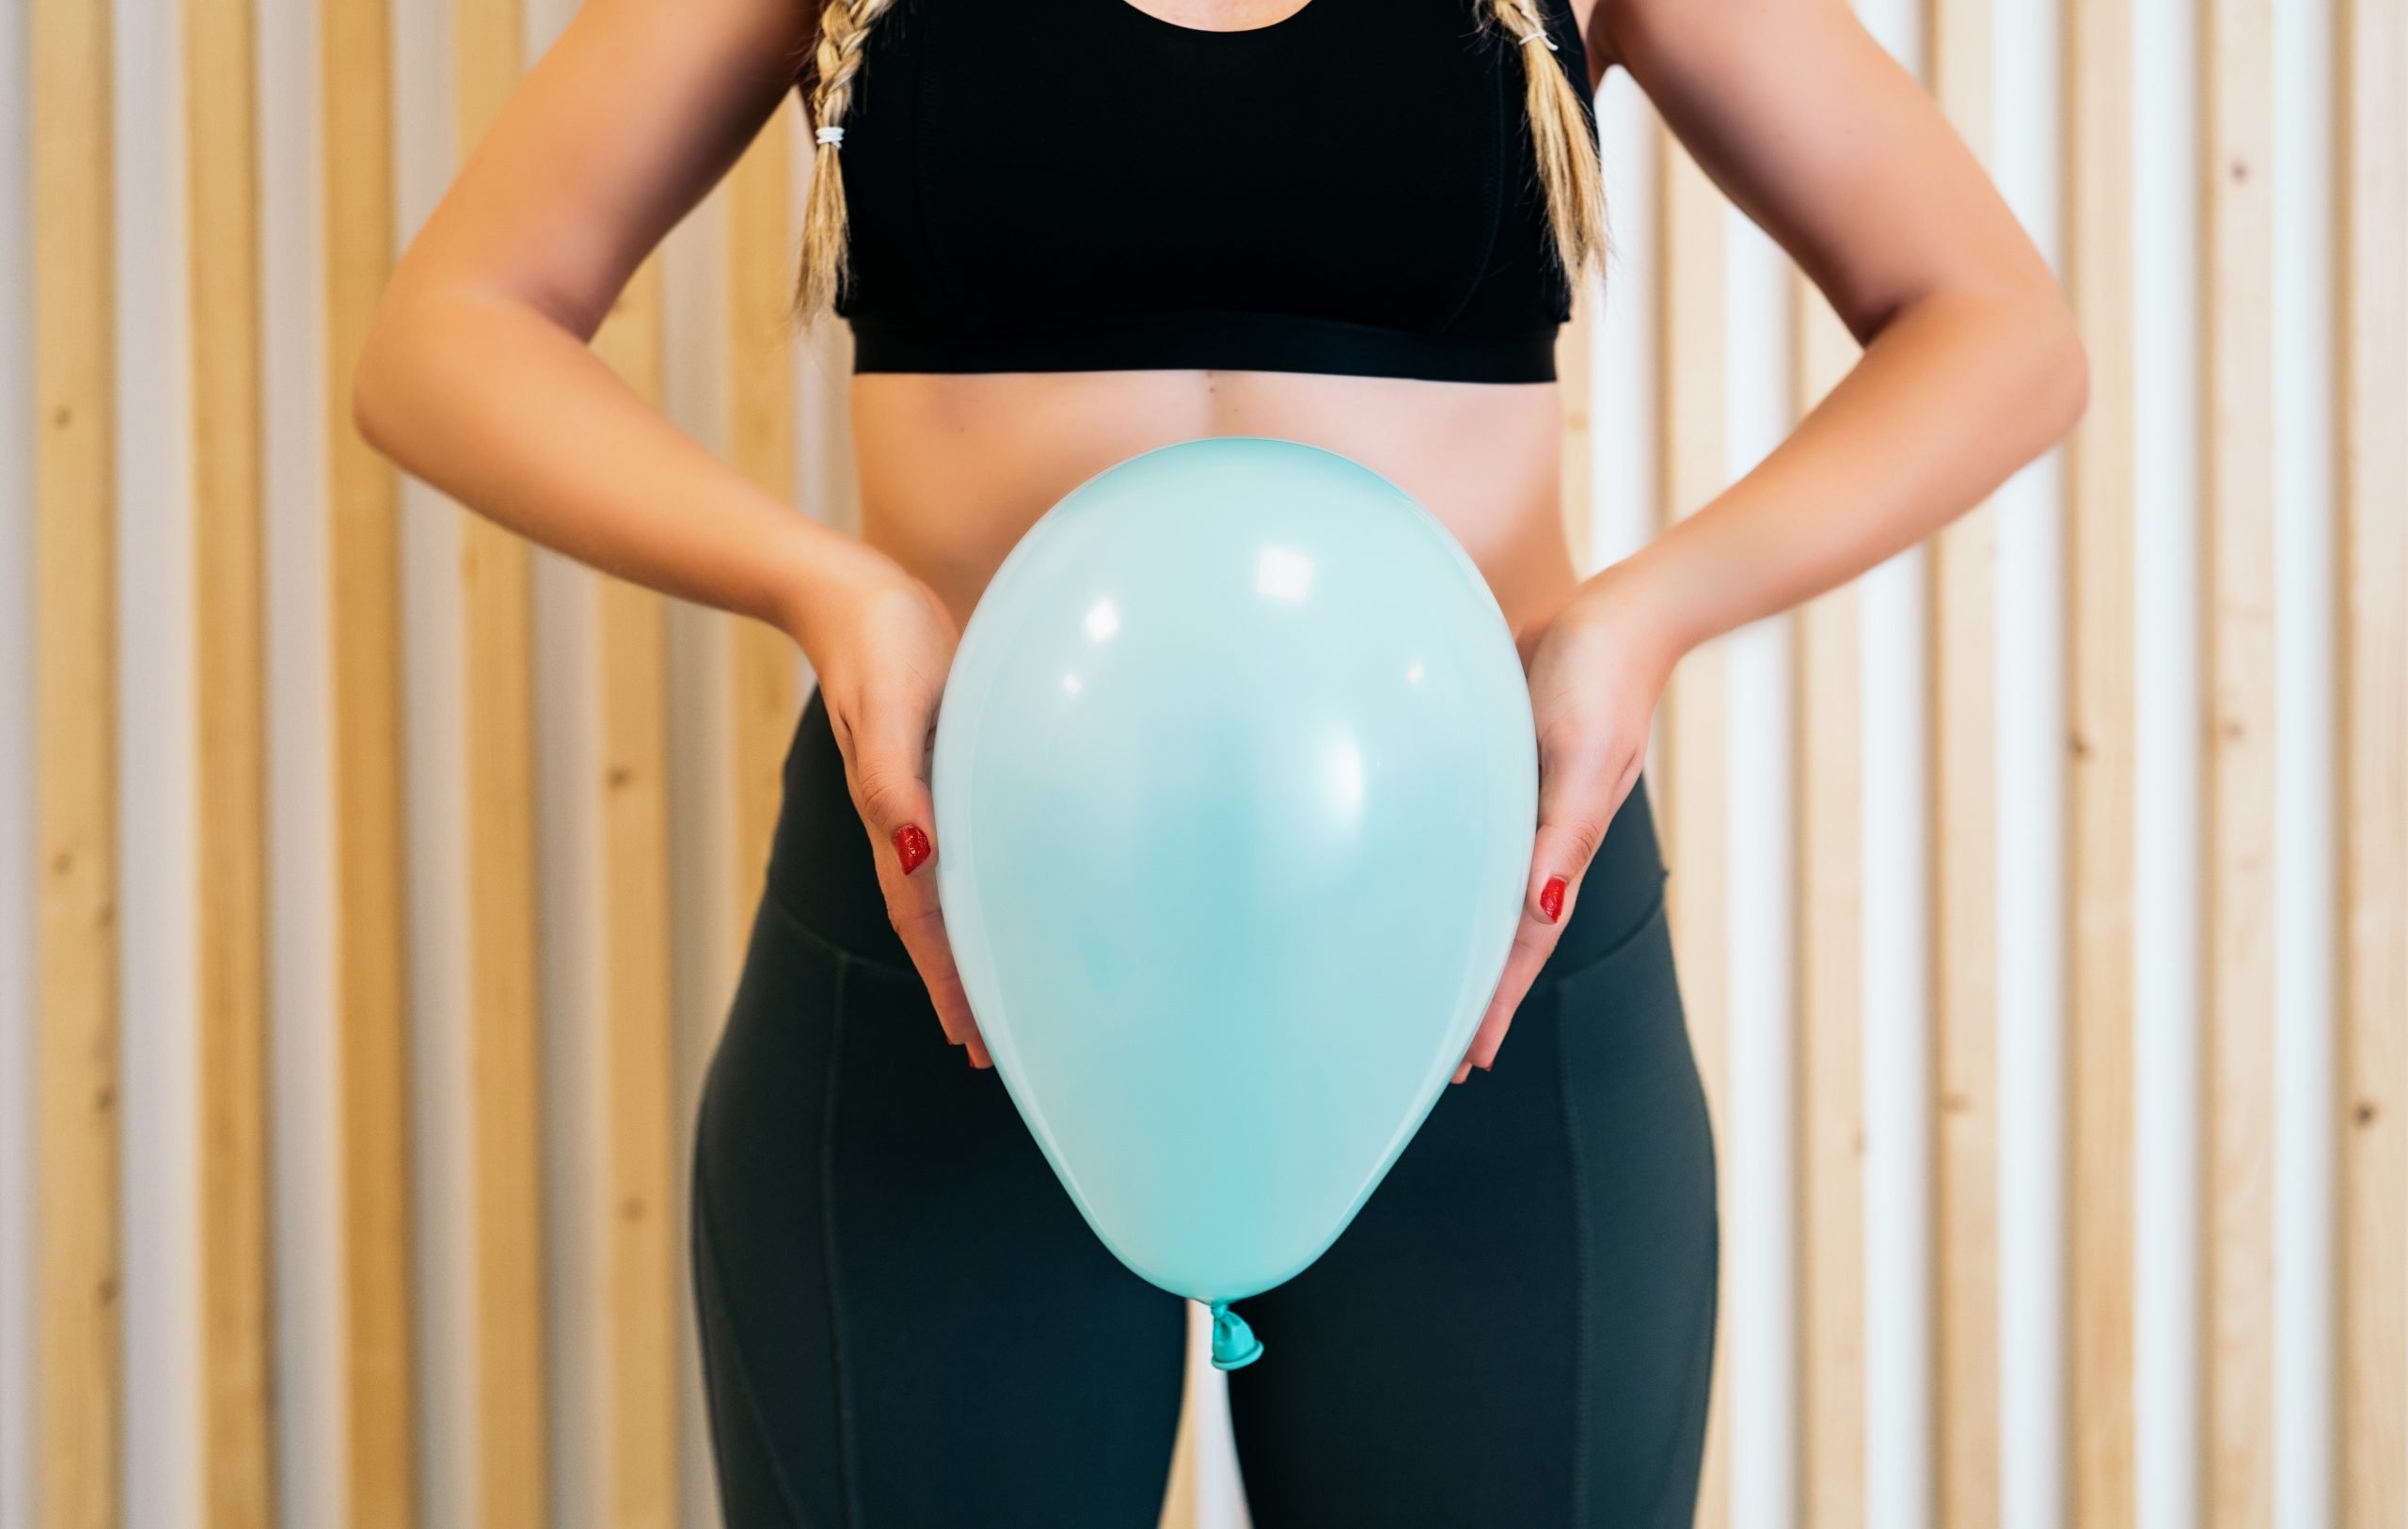 What is your pelvic floor actually